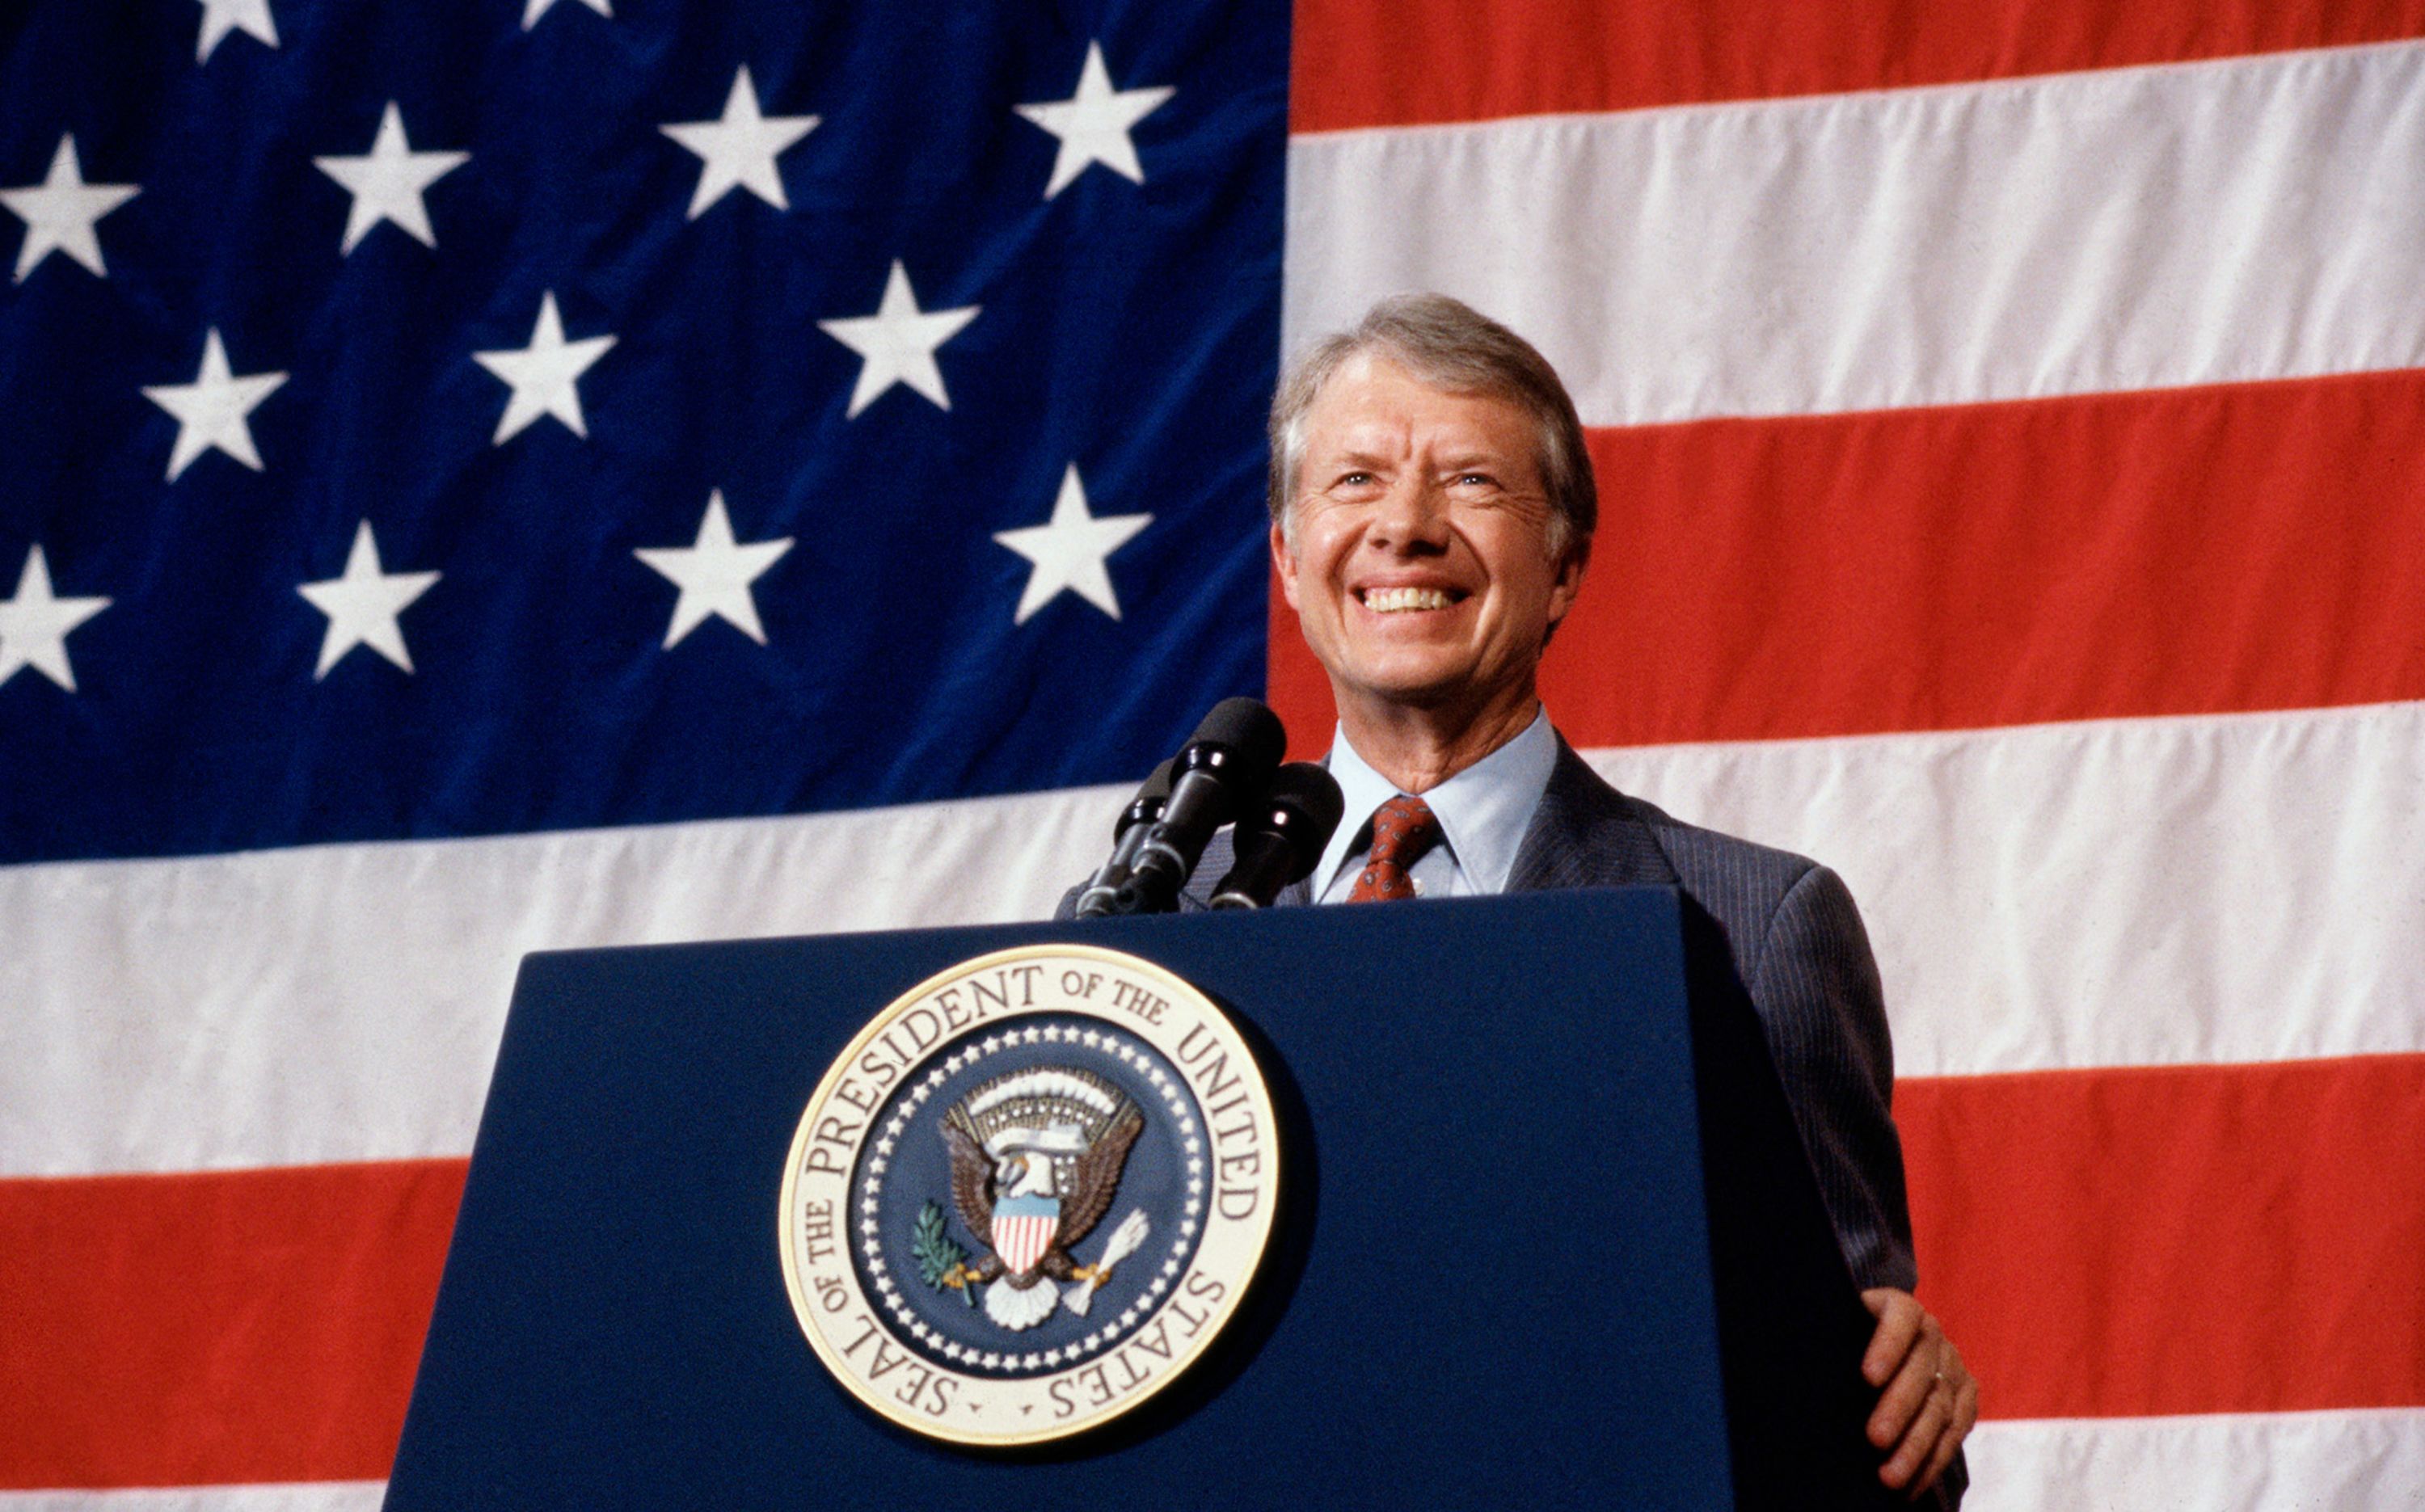 Jimmy Carter, the 39th president of the United States, speaks in Elk City, Oklahoma, in 1979.